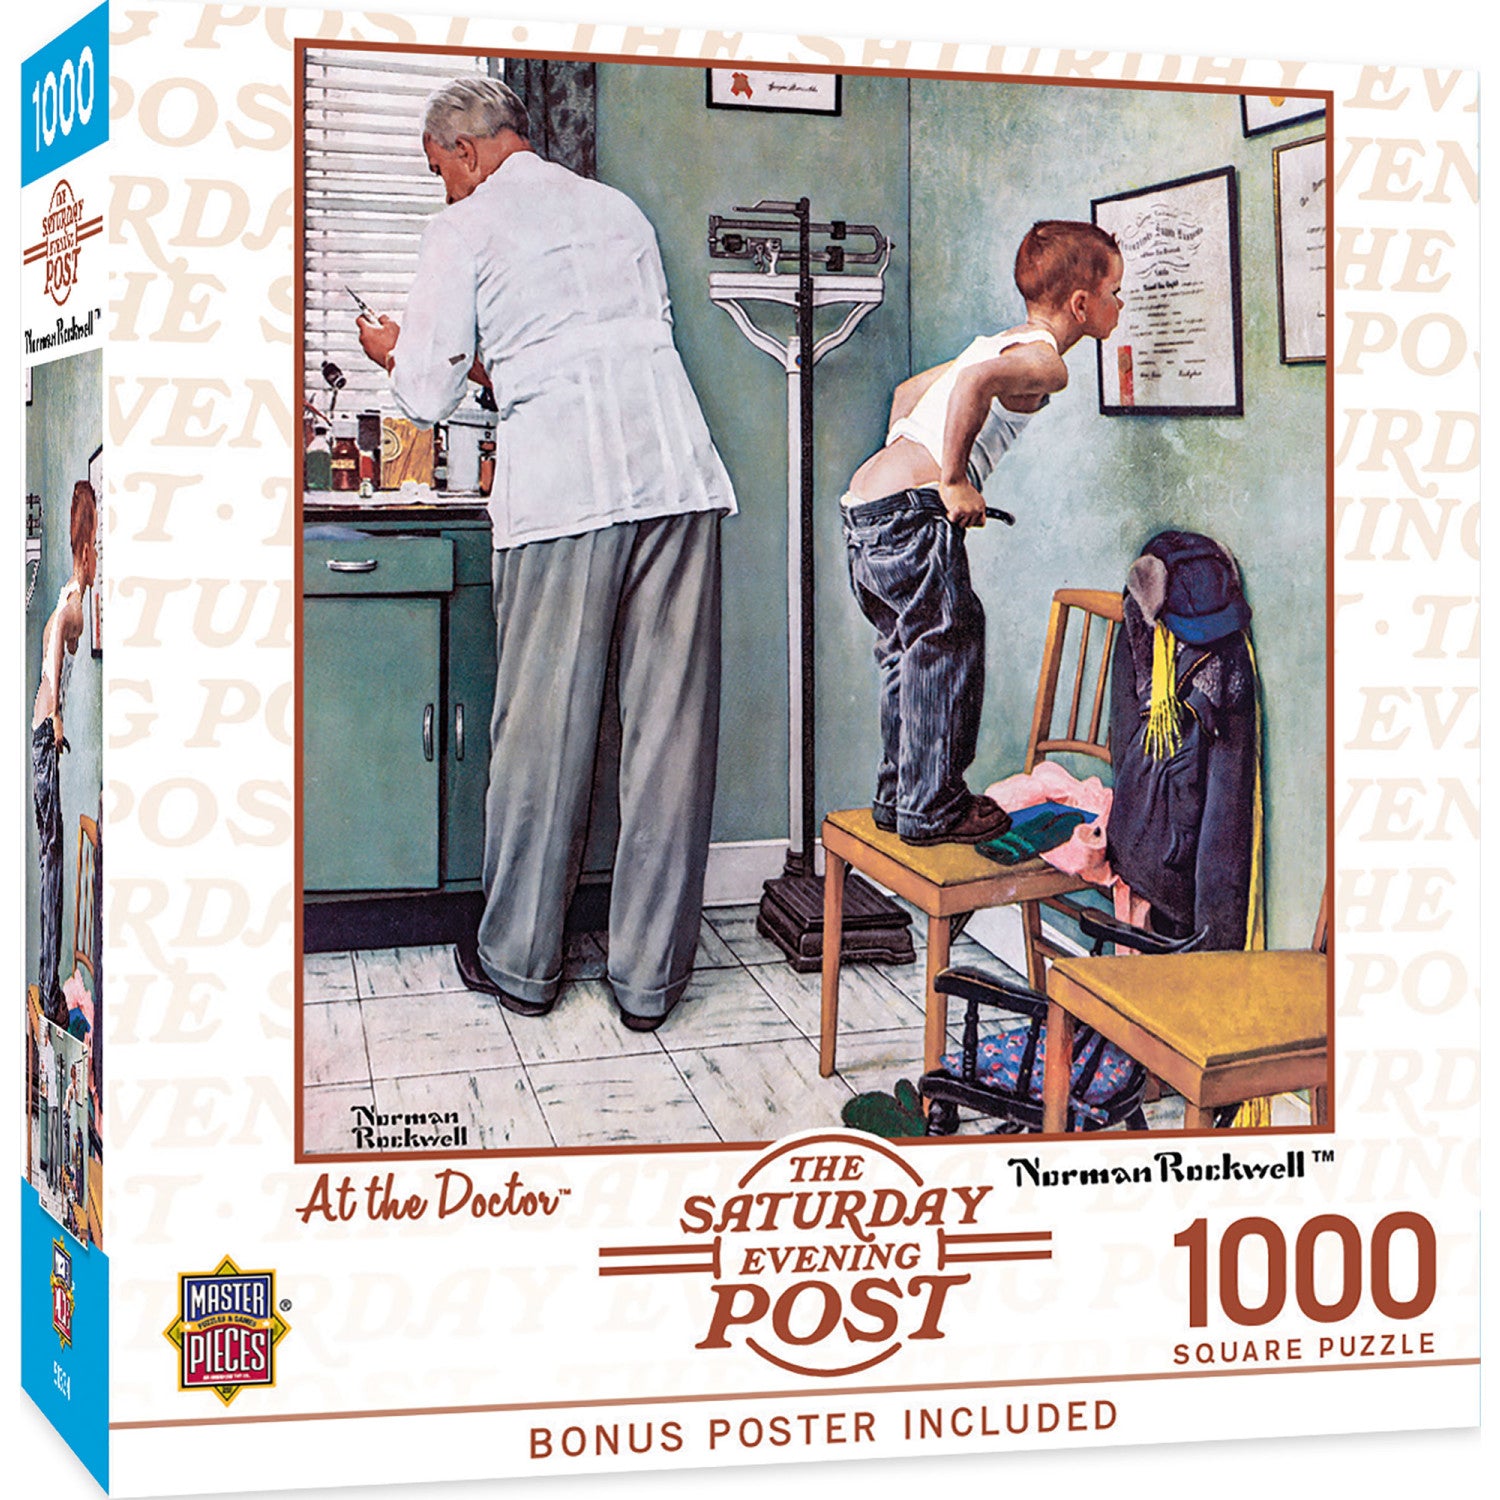 Saturday Evening Post - At the Doctor 1000 Piece Jigsaw Puzzle